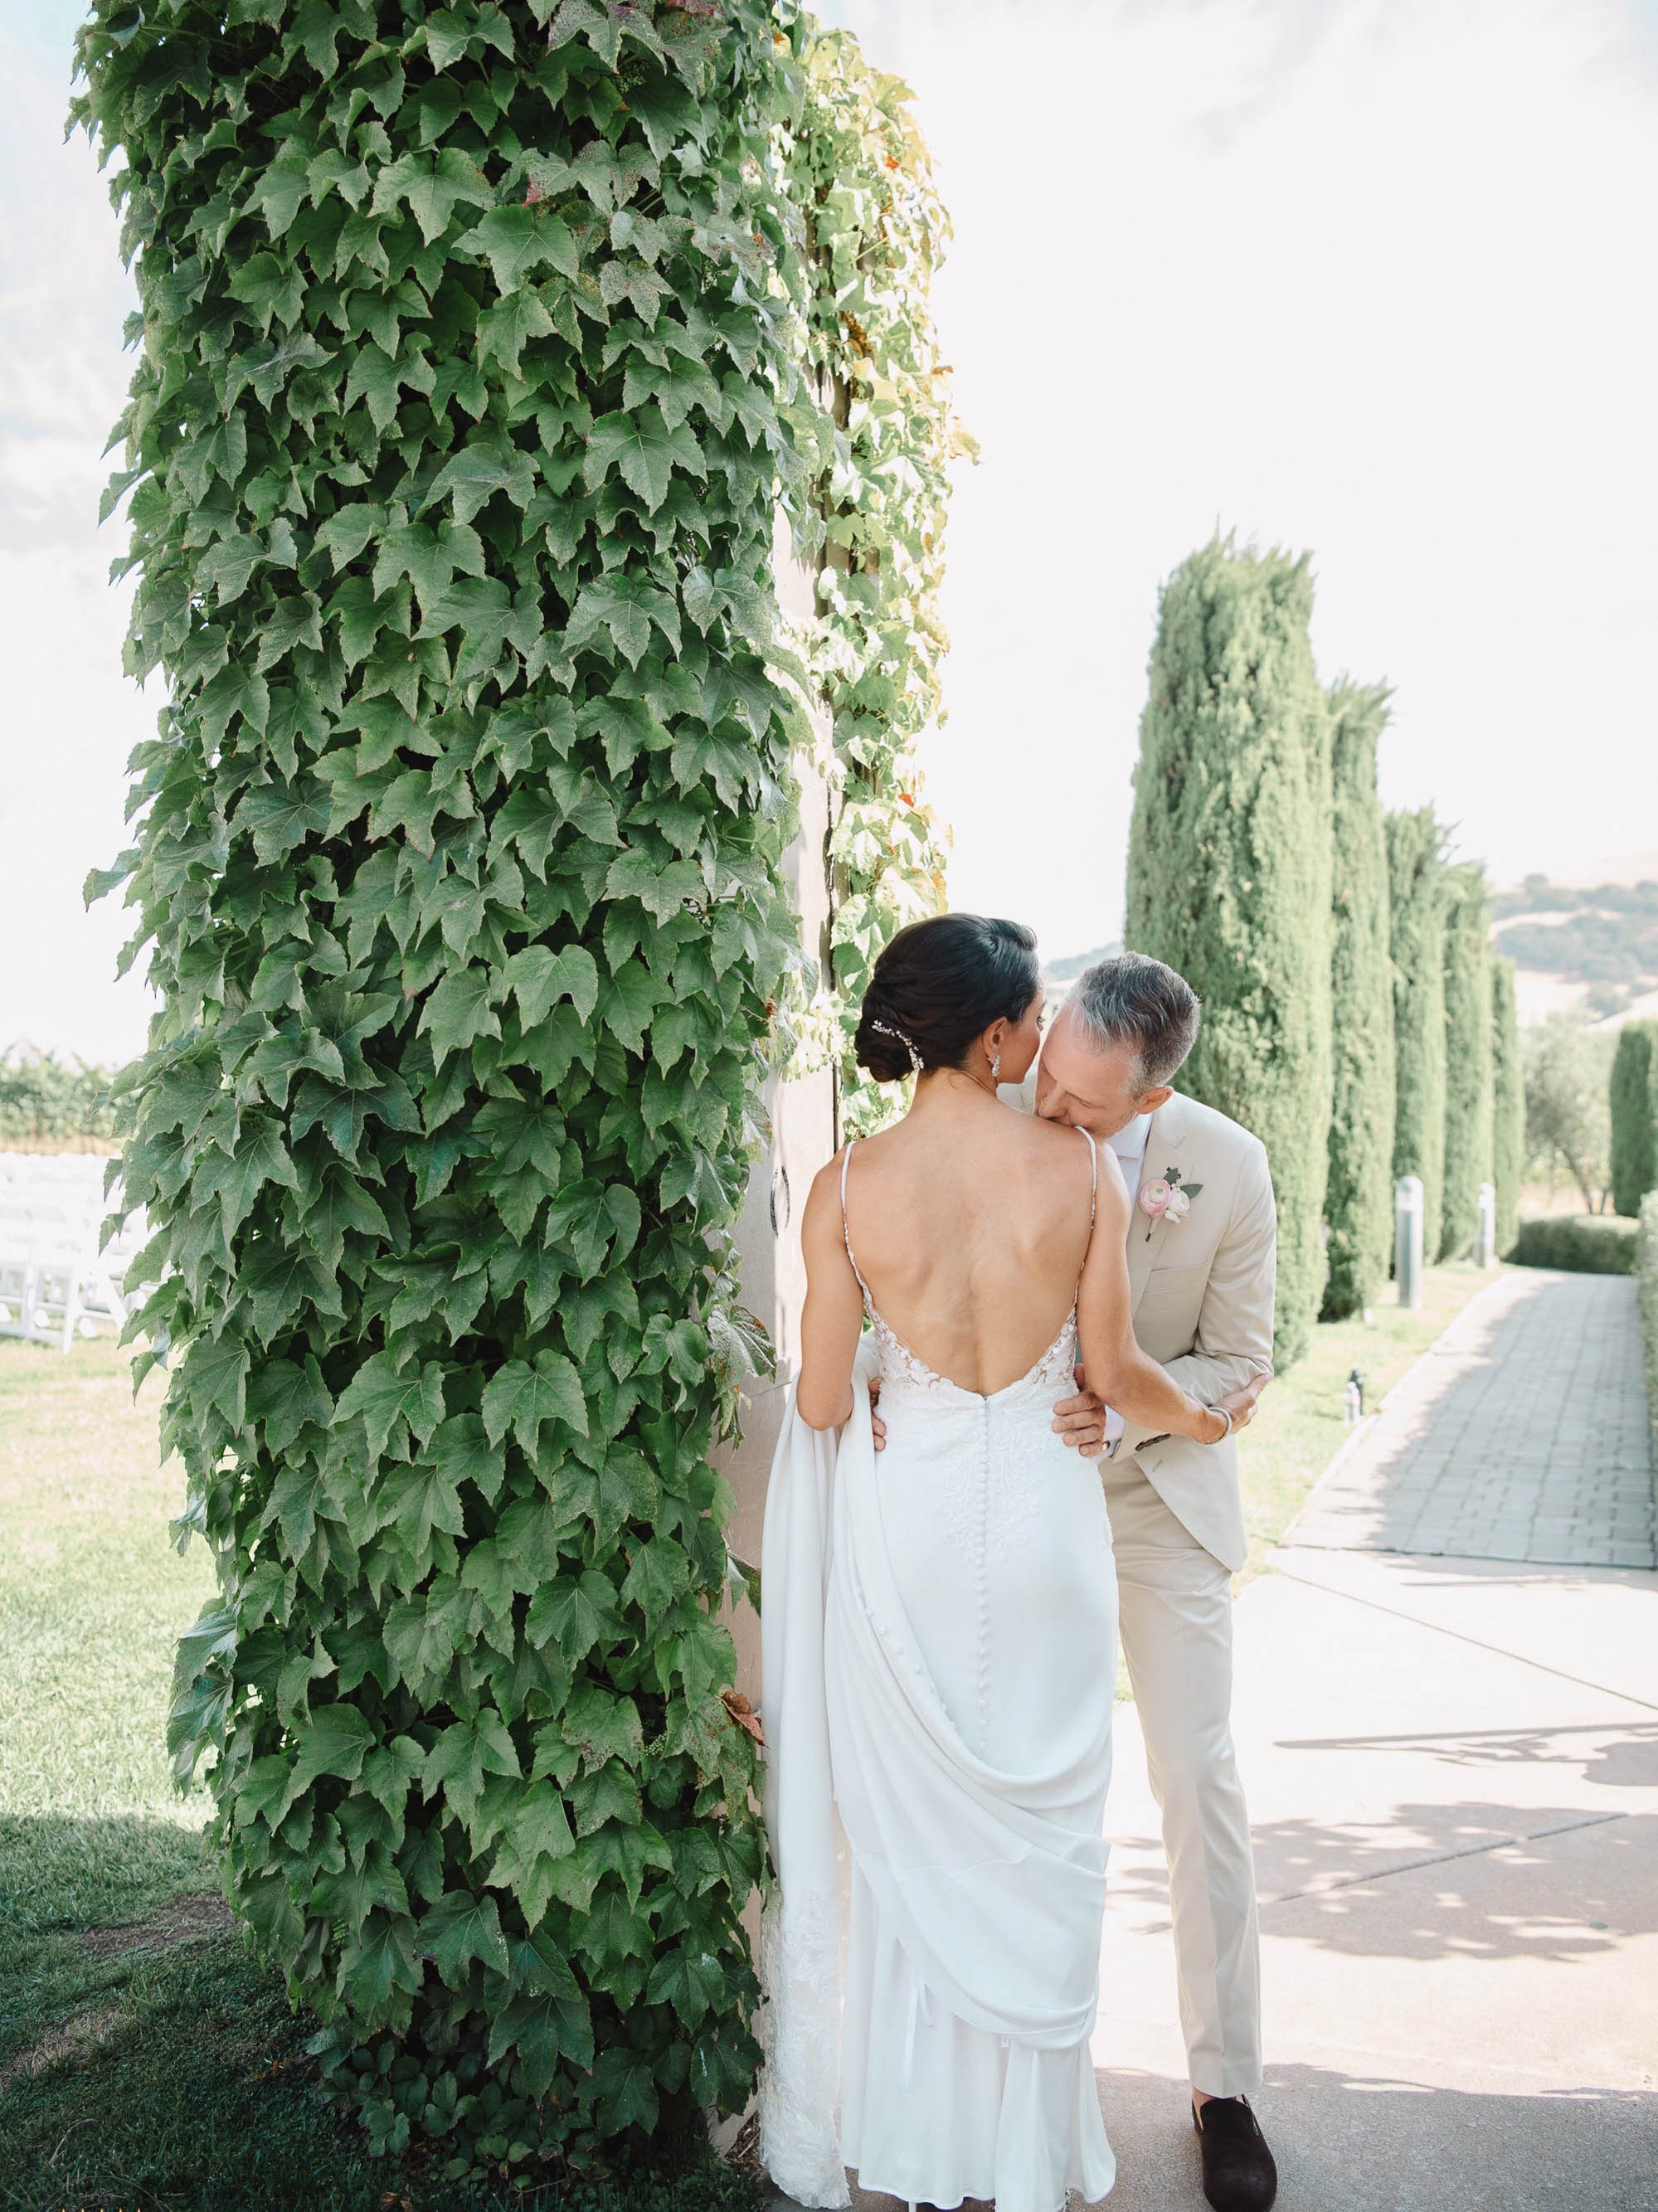 A bride and groom kiss in front of an ivy covered arbor.